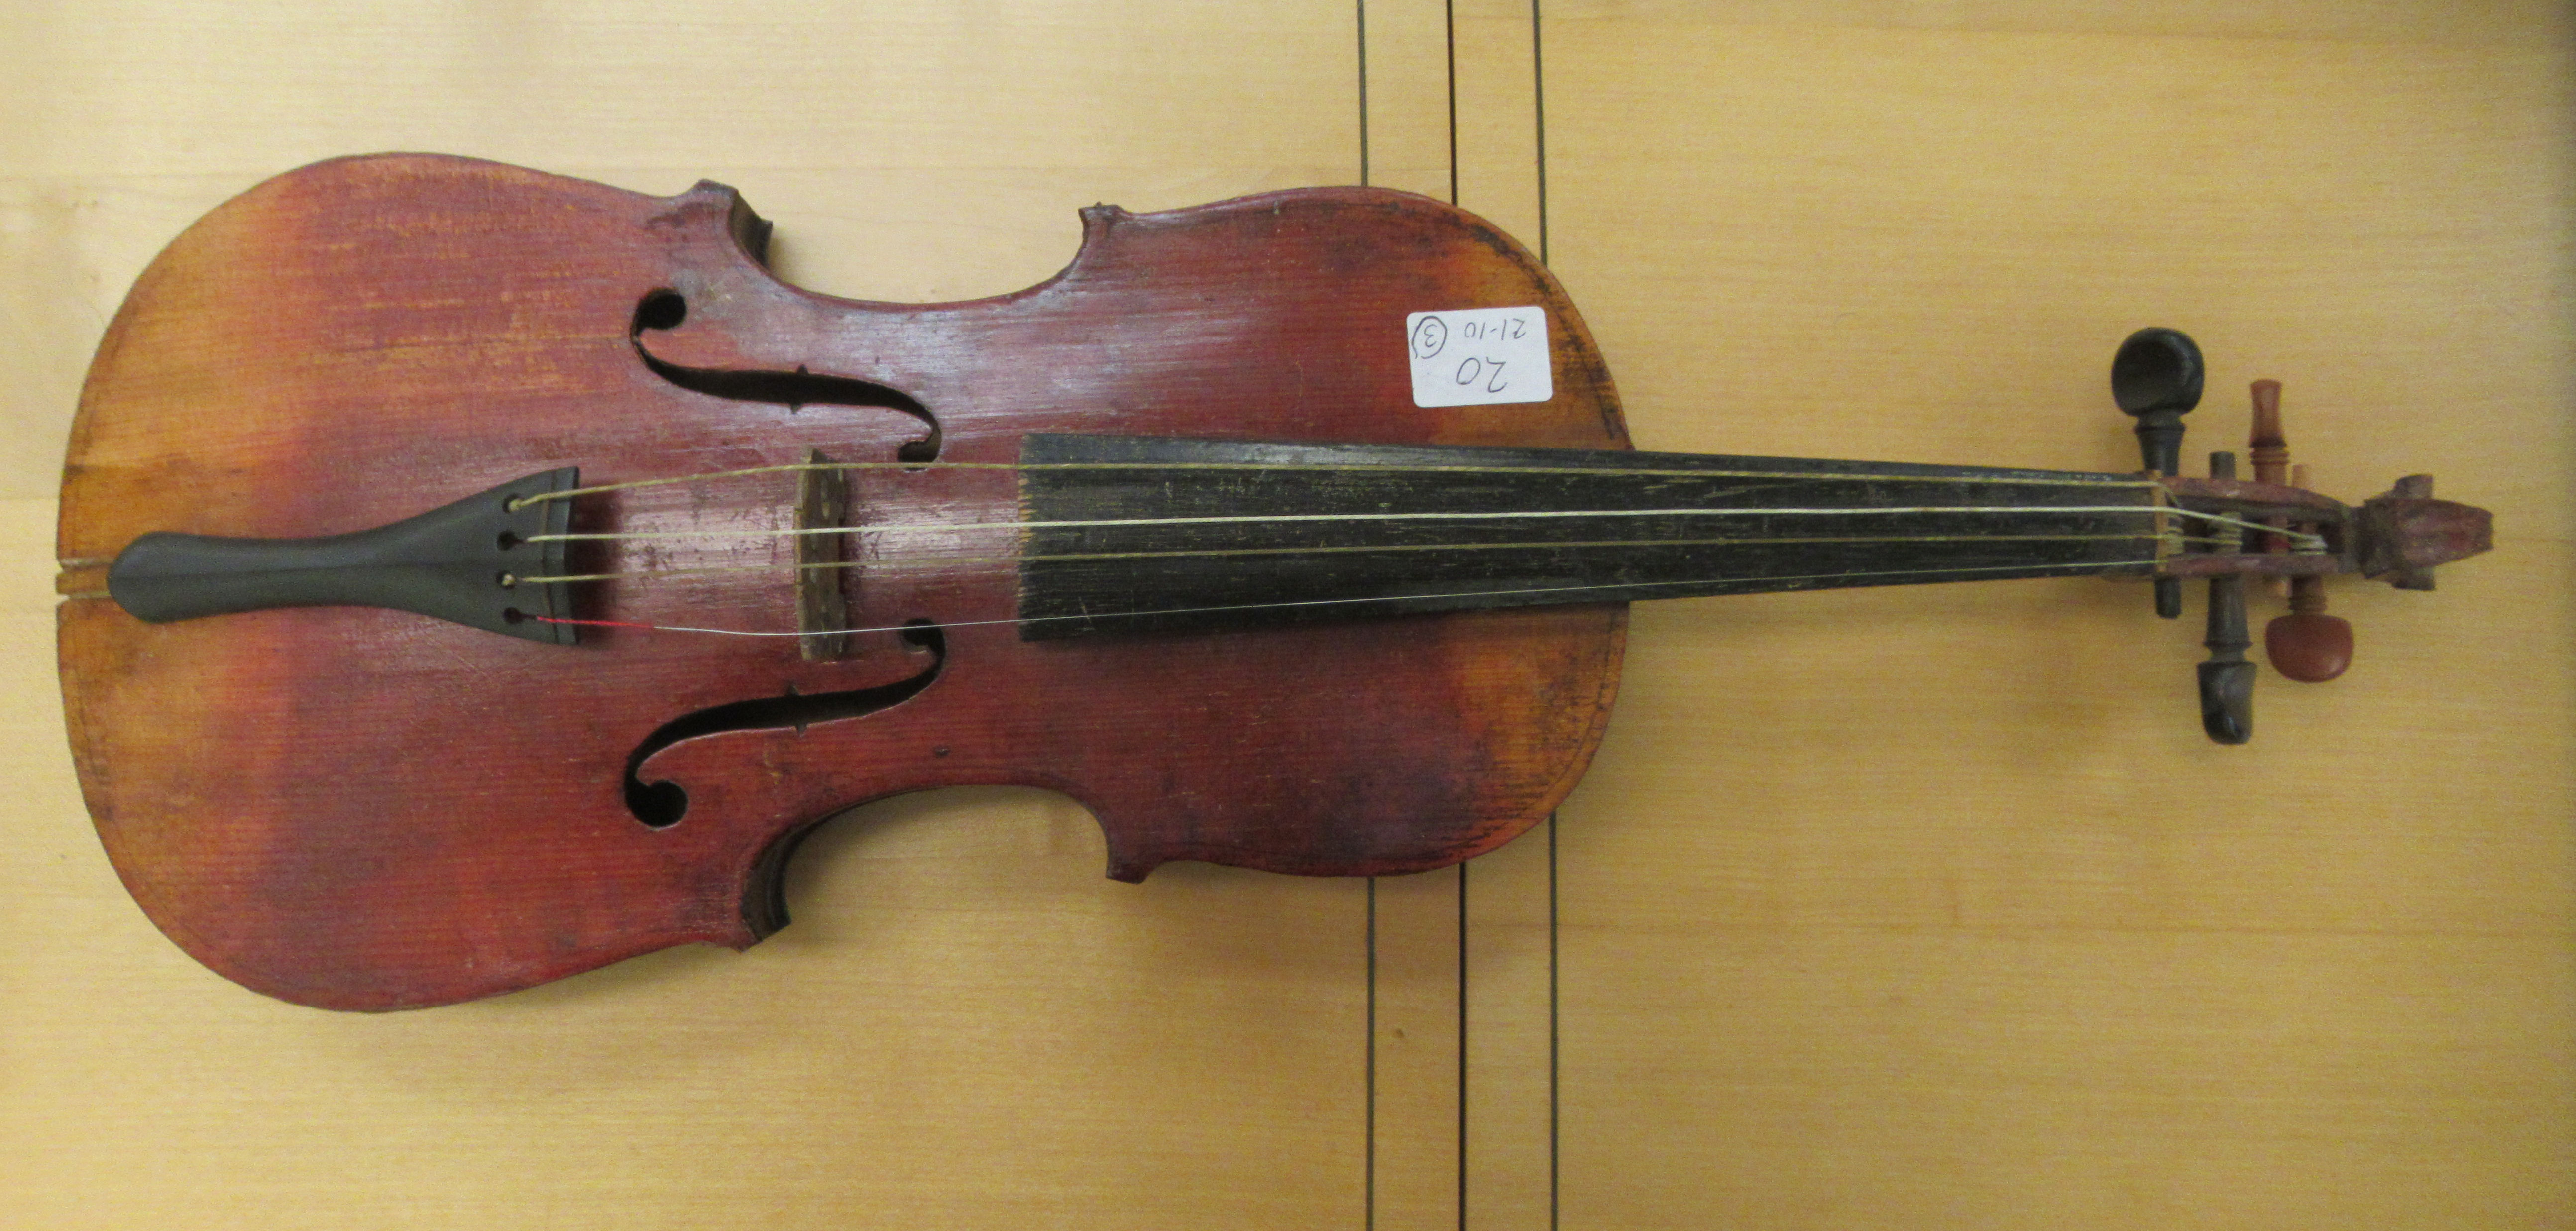 Three 19th/20thC violins, one with a one piece back  14"L; the others with two piece backs  13" - Image 2 of 16